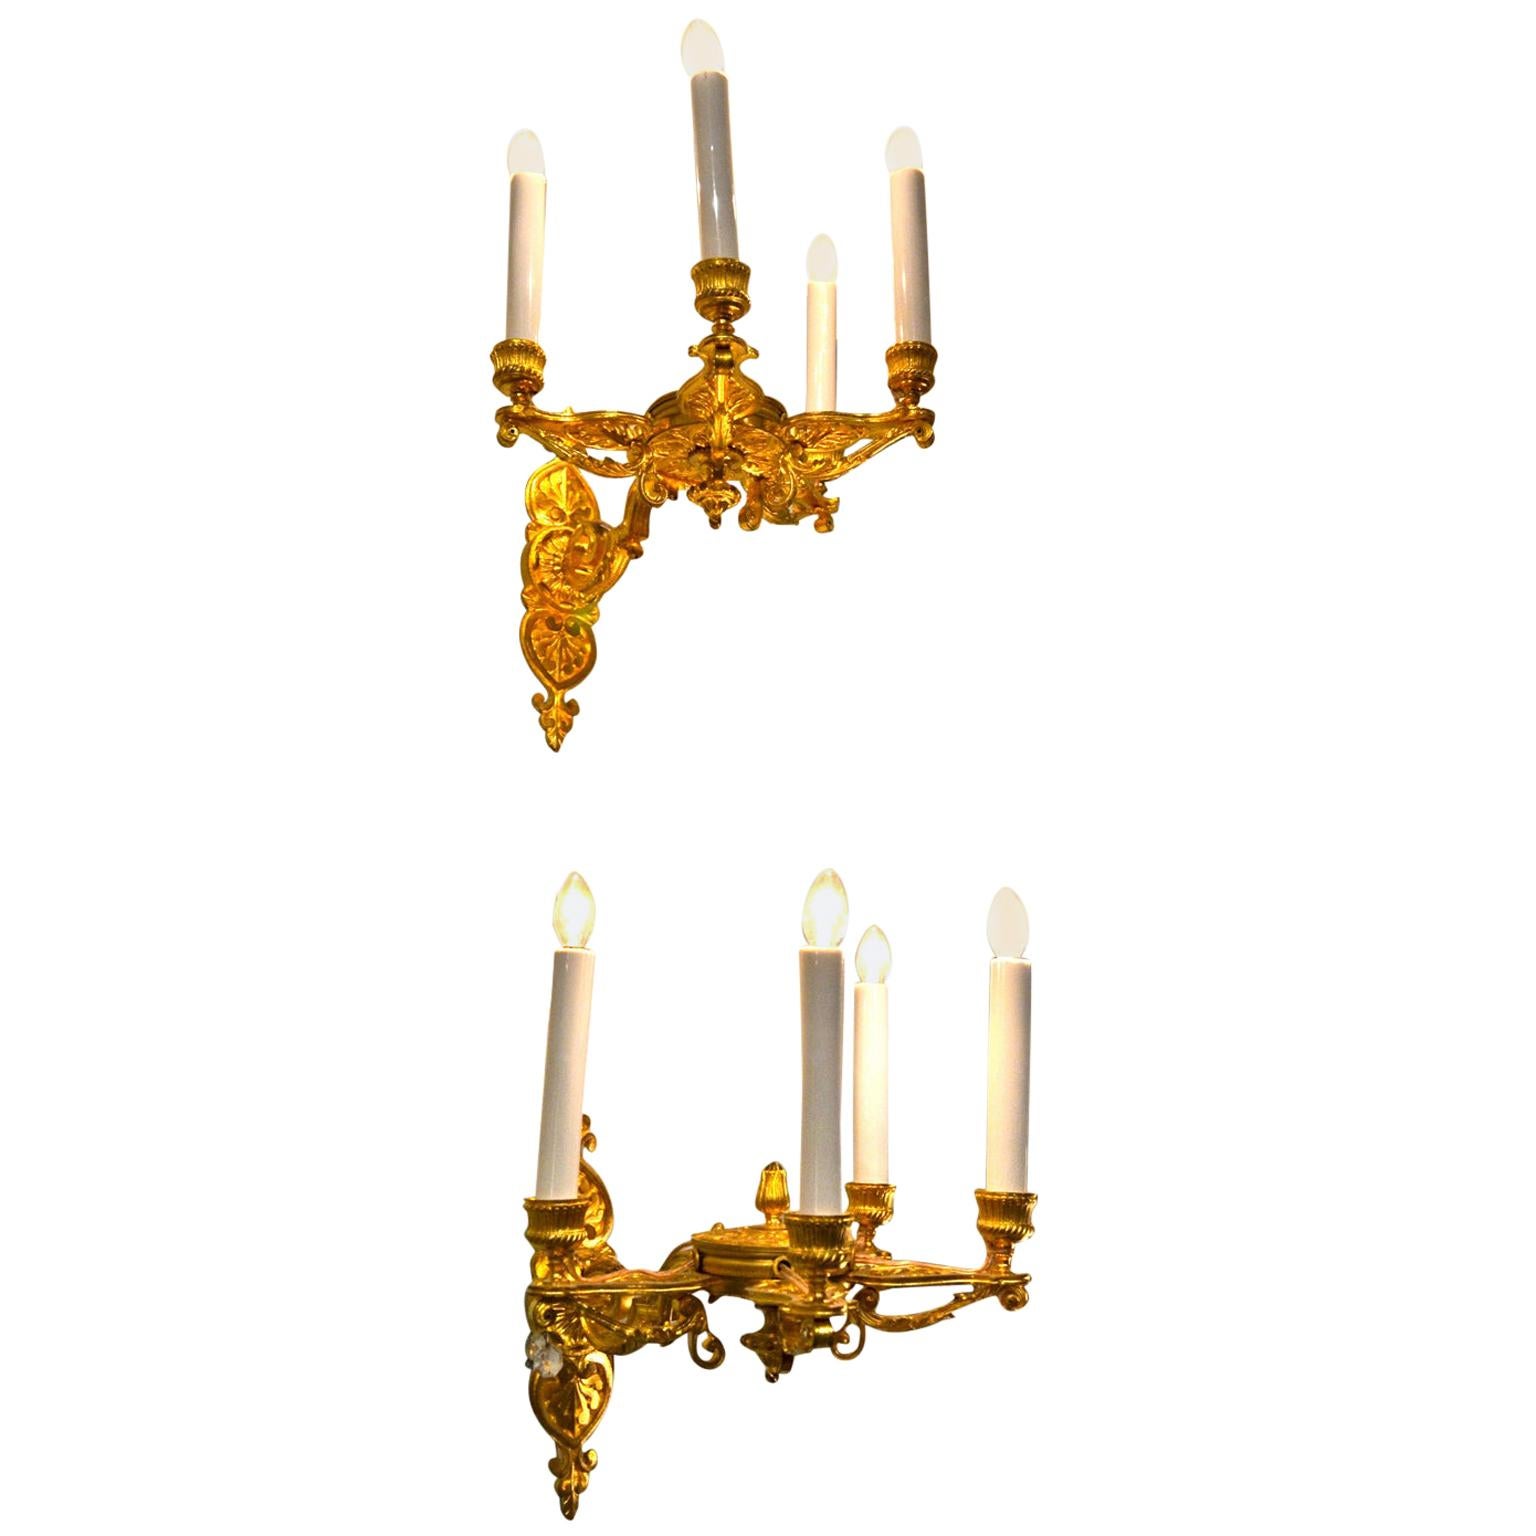 A fine pair of gilded bronze sconces each having four arms which are decorated with palmettes. The arms are attached to a decorated central 'well' similar to a lidded reservoir which attaches to a decorated back plate. Originally for candles they